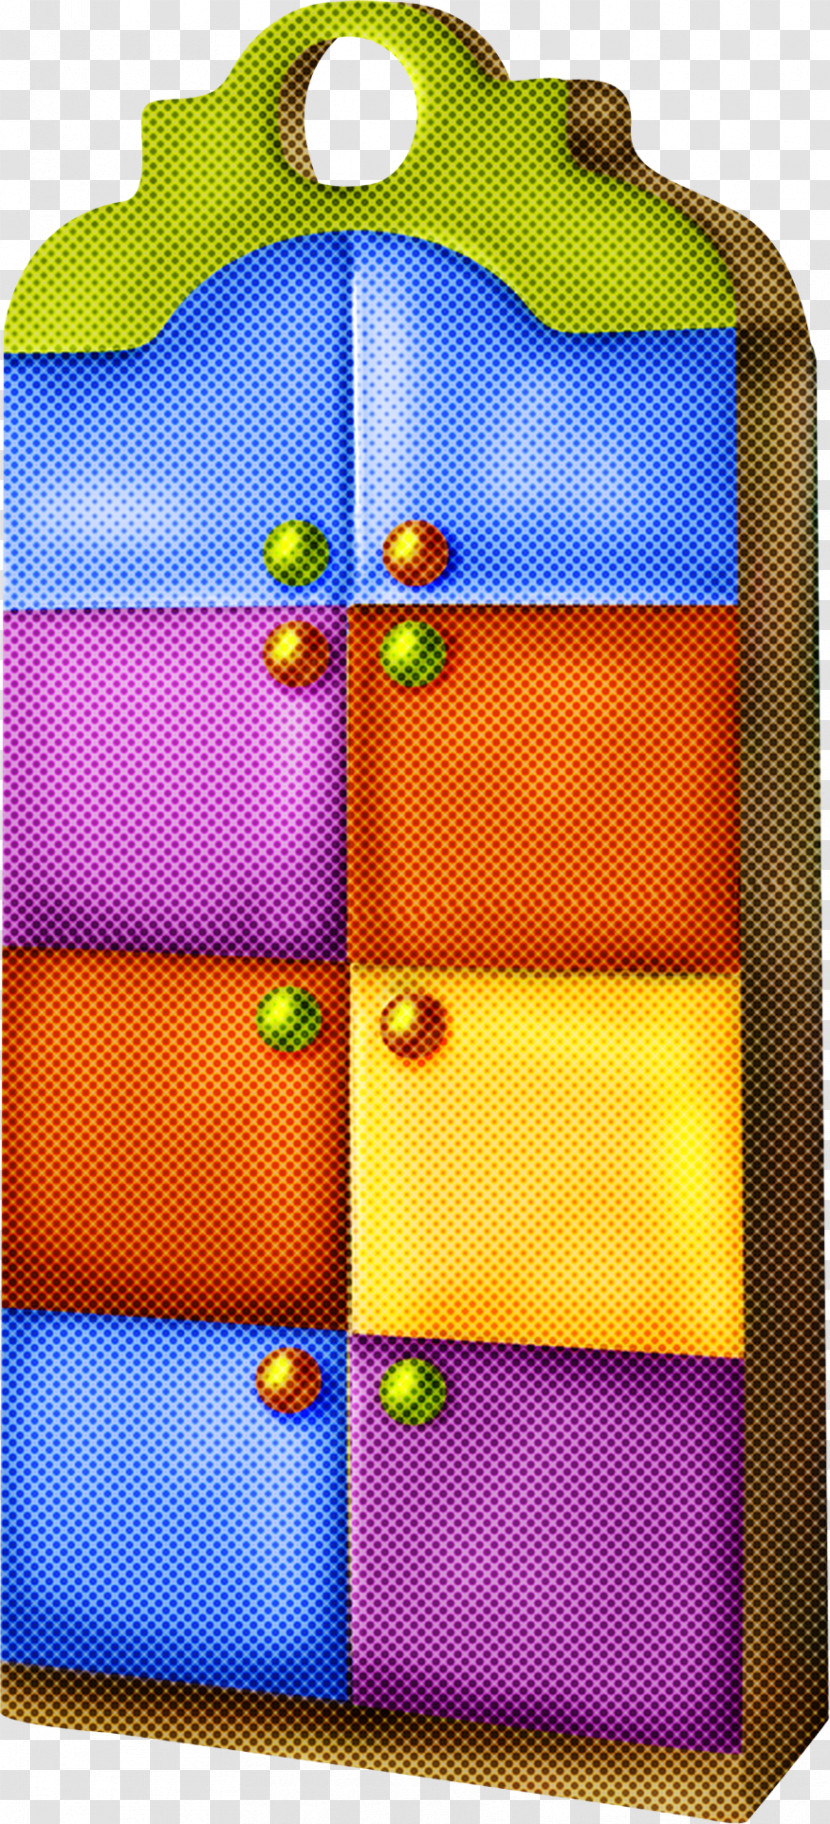 Colorfulness Games Rectangle Square Transparent PNG